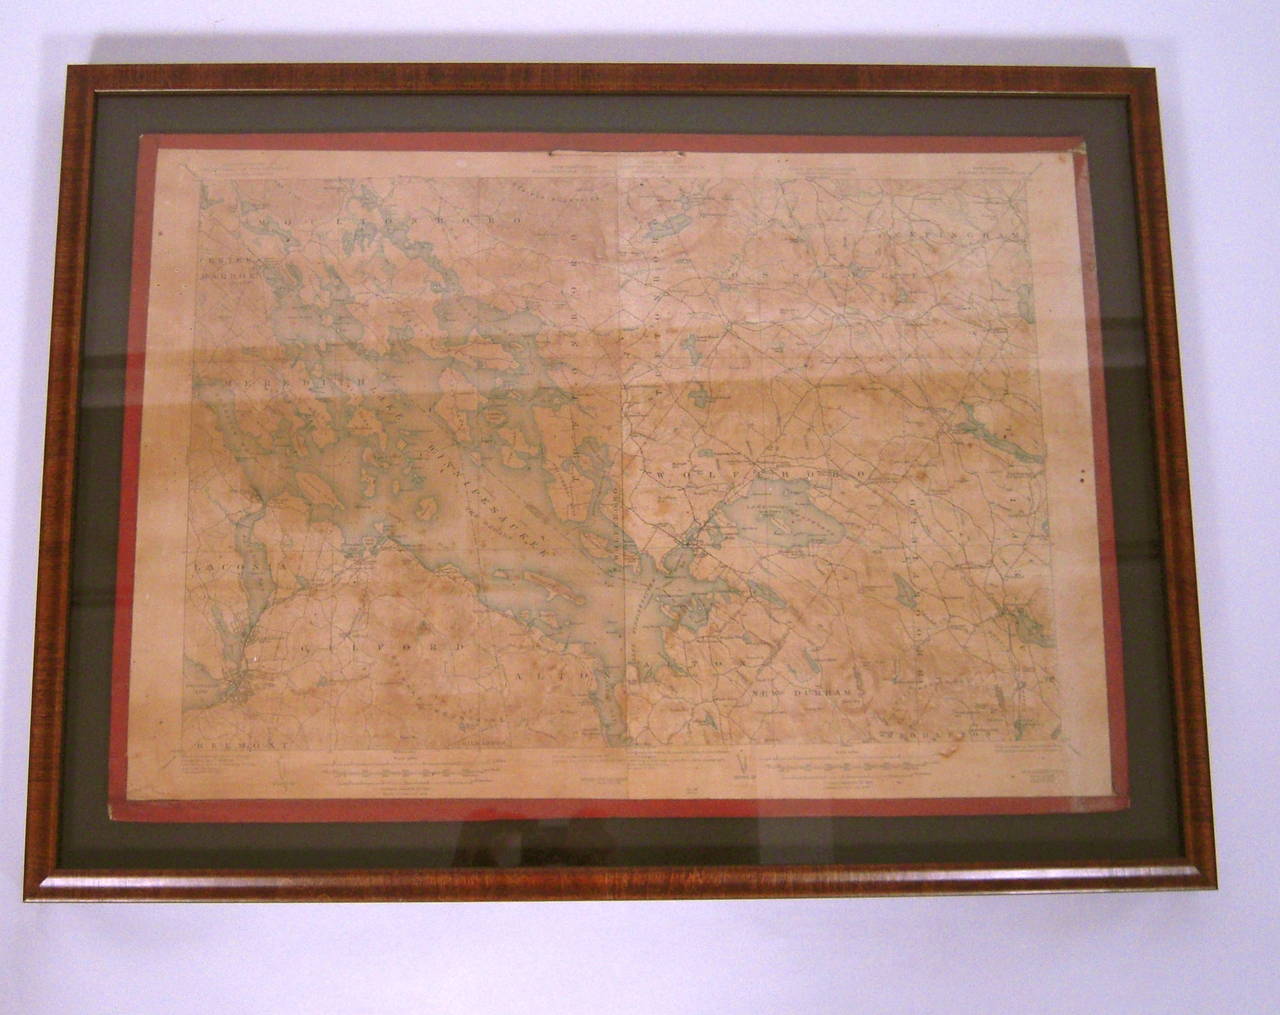 A framed, very detailed map of lake Winnipesaukee, NH and surrounding areas (the 'Winnipesaukee Quadrangle or Wolfeboro Triangle'), published by the United States Department of the Interior Geological Survey, circa 1925, printed on heavy card stock